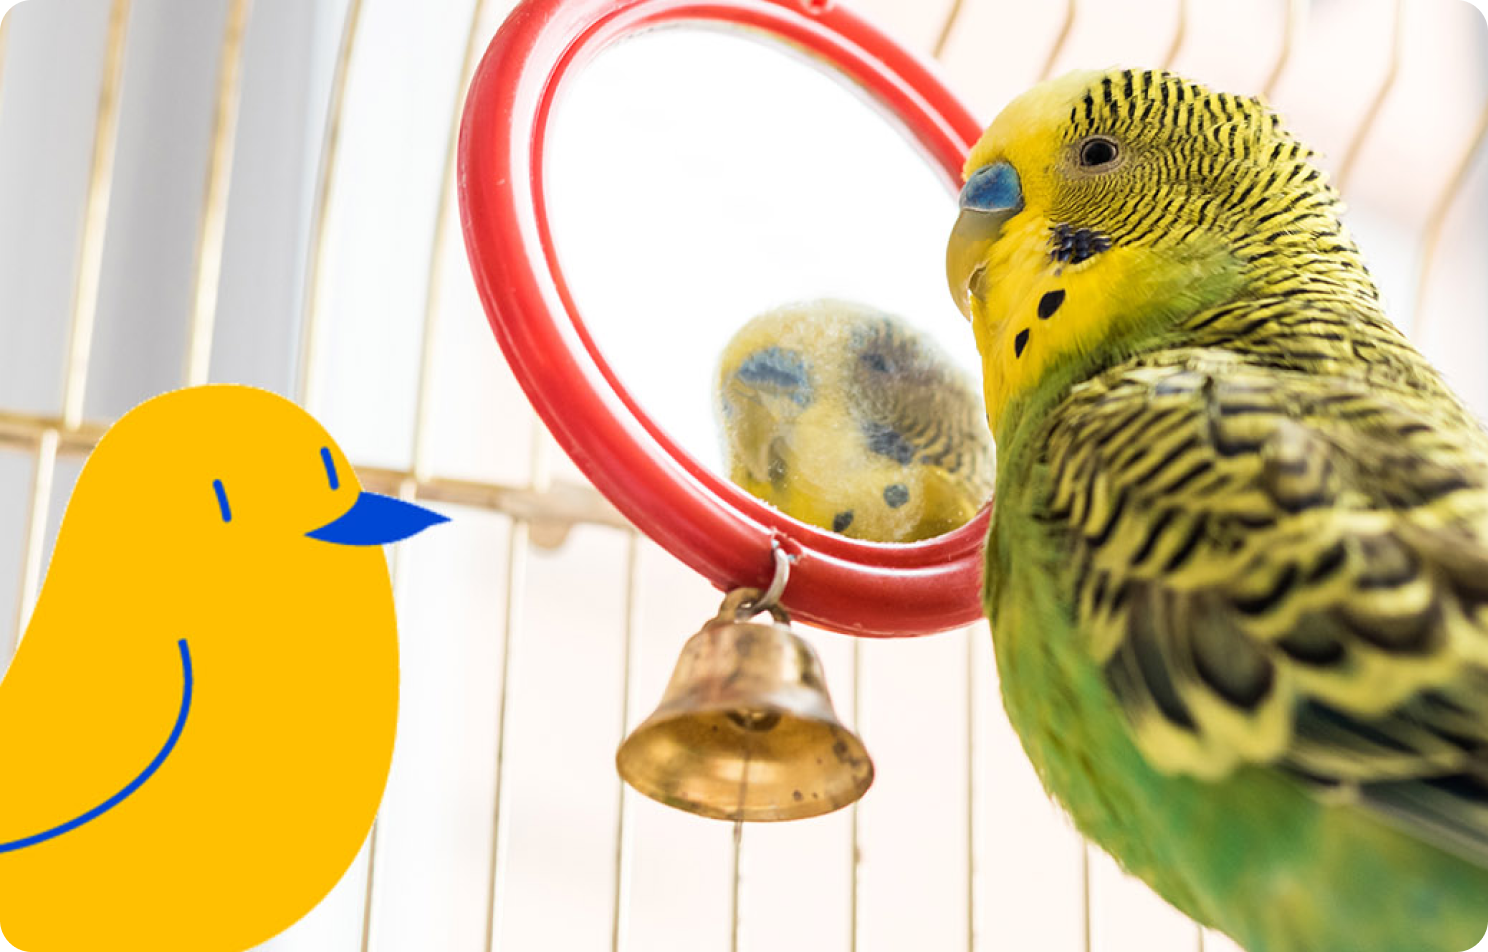 Pet Owner Guide to Caring for a Bird